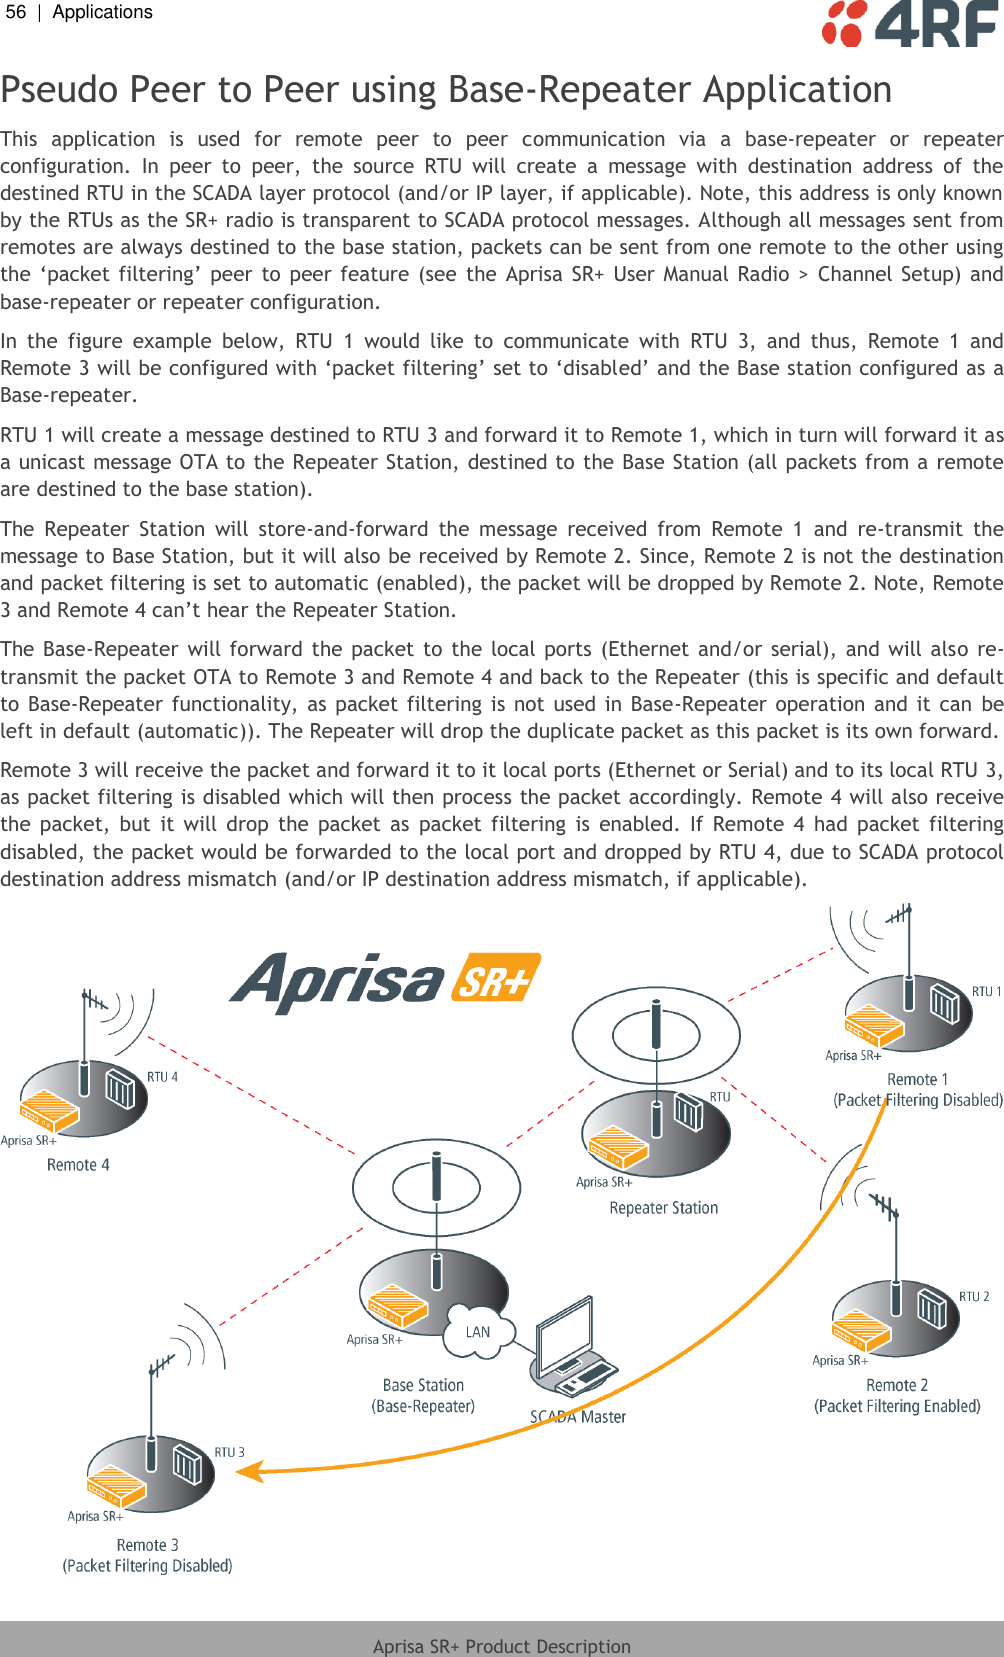 56  |  Applications   Aprisa SR+ Product Description  Pseudo Peer to Peer using Base-Repeater Application This  application  is  used  for  remote  peer  to  peer  communication  via  a  base-repeater  or  repeater configuration.  In  peer  to  peer,  the  source  RTU  will  create  a  message  with  destination  address  of  the destined RTU in the SCADA layer protocol (and/or IP layer, if applicable). Note, this address is only known by the RTUs as the SR+ radio is transparent to SCADA protocol messages. Although all messages sent from remotes are always destined to the base station, packets can be sent from one remote to the other using the ‘packet  filtering’ peer to  peer  feature (see  the  Aprisa  SR+ User  Manual  Radio  &gt;  Channel Setup) and base-repeater or repeater configuration. In  the  figure  example  below,  RTU  1  would  like  to  communicate  with  RTU  3,  and  thus,  Remote  1  and Remote 3 will be configured with ‘packet filtering’ set to ‘disabled’ and the Base station configured as a Base-repeater.  RTU 1 will create a message destined to RTU 3 and forward it to Remote 1, which in turn will forward it as a unicast message OTA to the Repeater Station, destined to the Base Station (all packets from a remote are destined to the base station).  The  Repeater  Station  will  store-and-forward  the  message  received  from  Remote  1  and  re-transmit  the message to Base Station, but it will also be received by Remote 2. Since, Remote 2 is not the destination and packet filtering is set to automatic (enabled), the packet will be dropped by Remote 2. Note, Remote 3 and Remote 4 can’t hear the Repeater Station. The Base-Repeater  will forward  the packet  to  the local  ports  (Ethernet  and/or  serial), and  will also re-transmit the packet OTA to Remote 3 and Remote 4 and back to the Repeater (this is specific and default to  Base-Repeater functionality, as  packet filtering  is  not  used in  Base-Repeater operation  and it  can  be left in default (automatic)). The Repeater will drop the duplicate packet as this packet is its own forward. Remote 3 will receive the packet and forward it to it local ports (Ethernet or Serial) and to its local RTU 3, as packet filtering is disabled which will then process the packet accordingly. Remote 4 will also receive the  packet,  but  it  will  drop  the  packet  as  packet  filtering  is  enabled.  If  Remote  4  had  packet  filtering disabled, the packet would be forwarded to the local port and dropped by RTU 4, due to SCADA protocol destination address mismatch (and/or IP destination address mismatch, if applicable).  